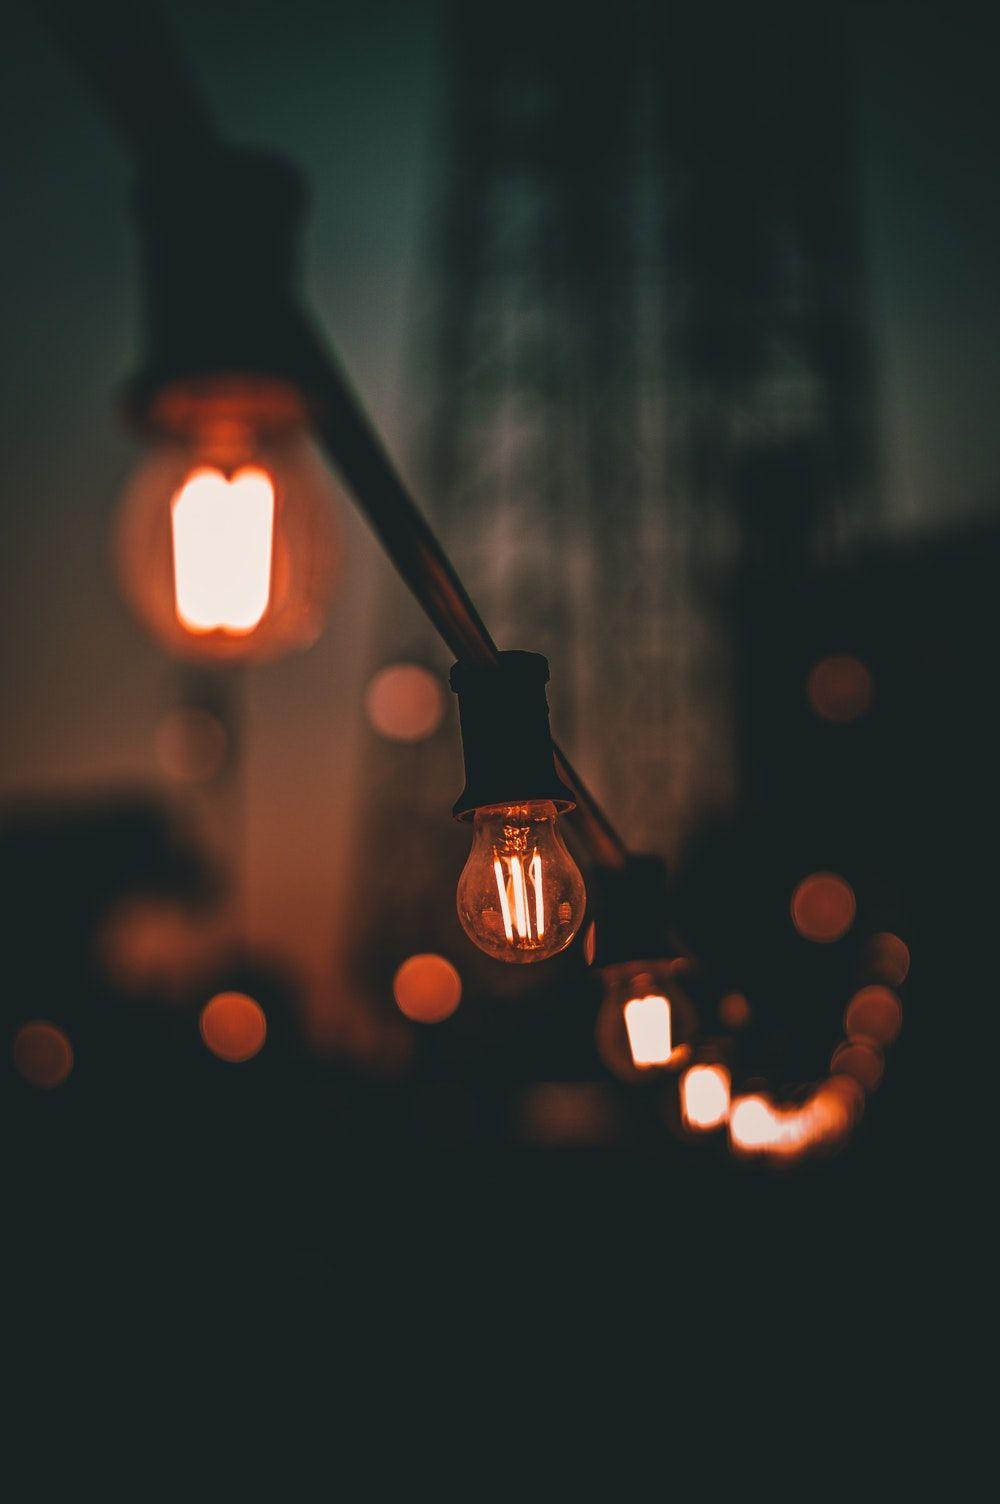 Light Picture [HD]. Download Free Image